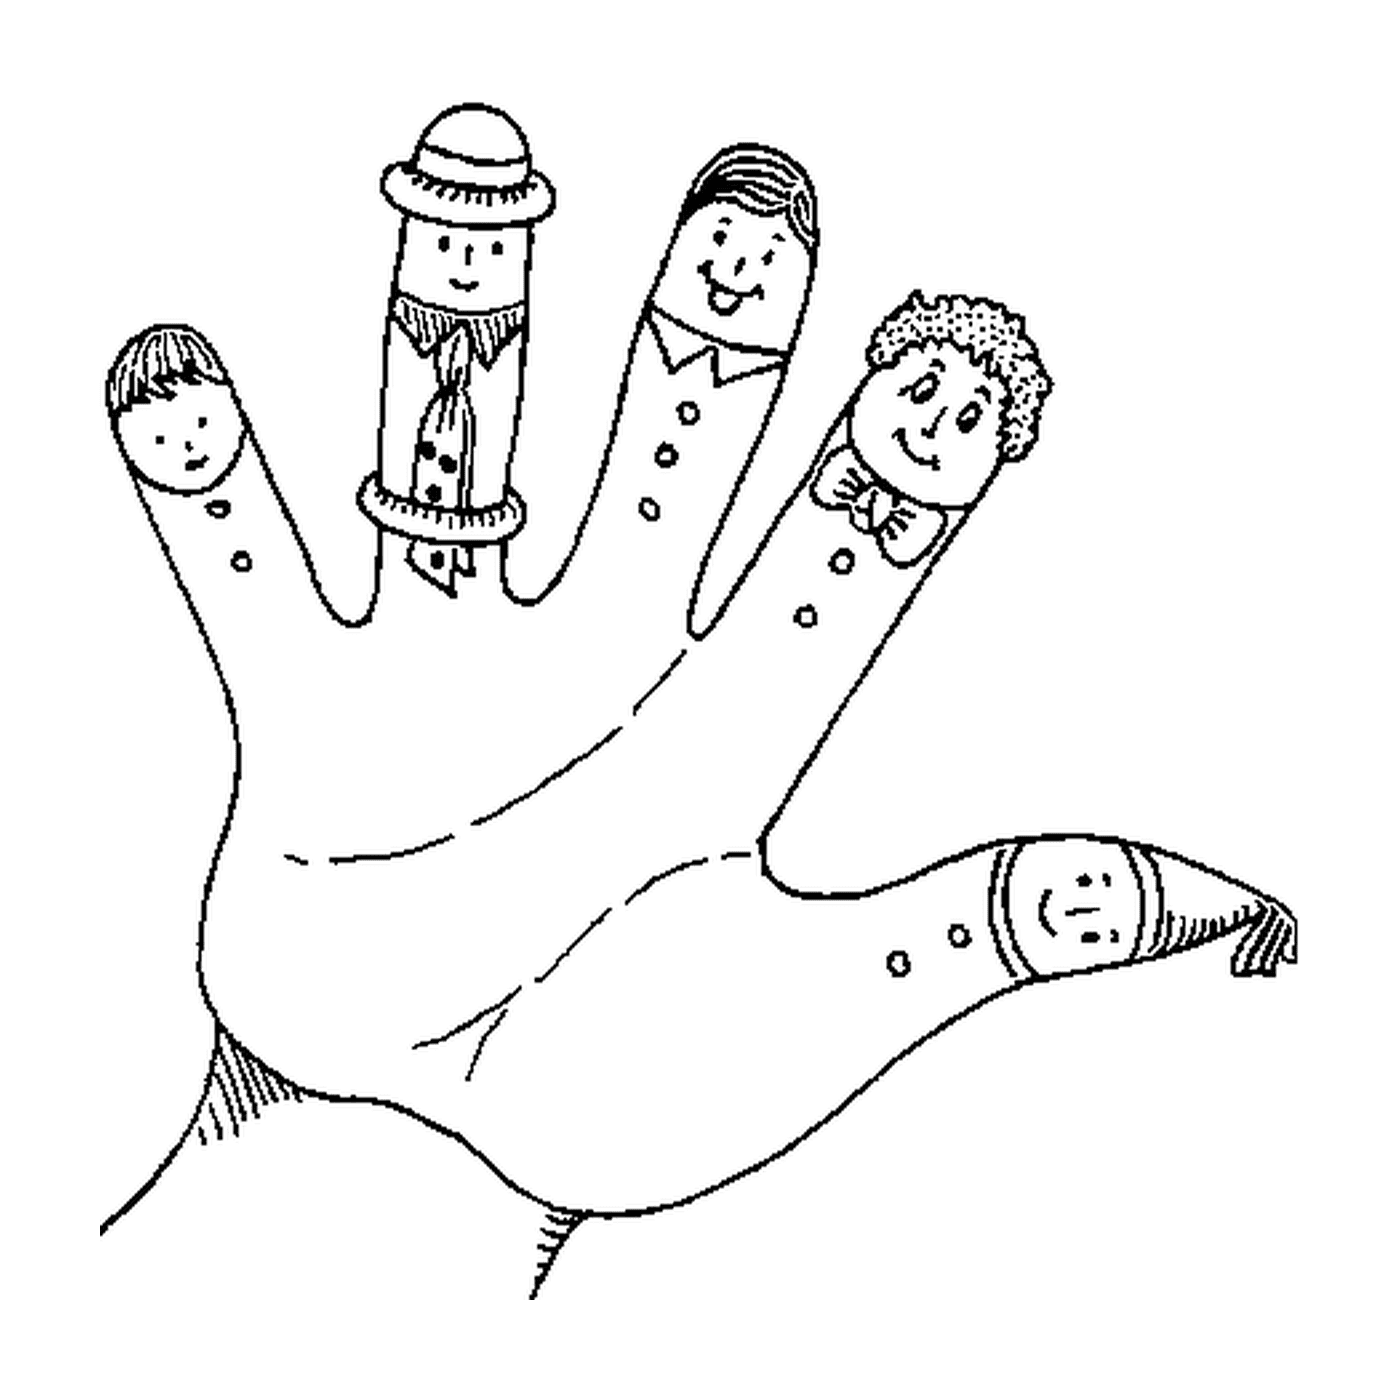  child hand with puppets 